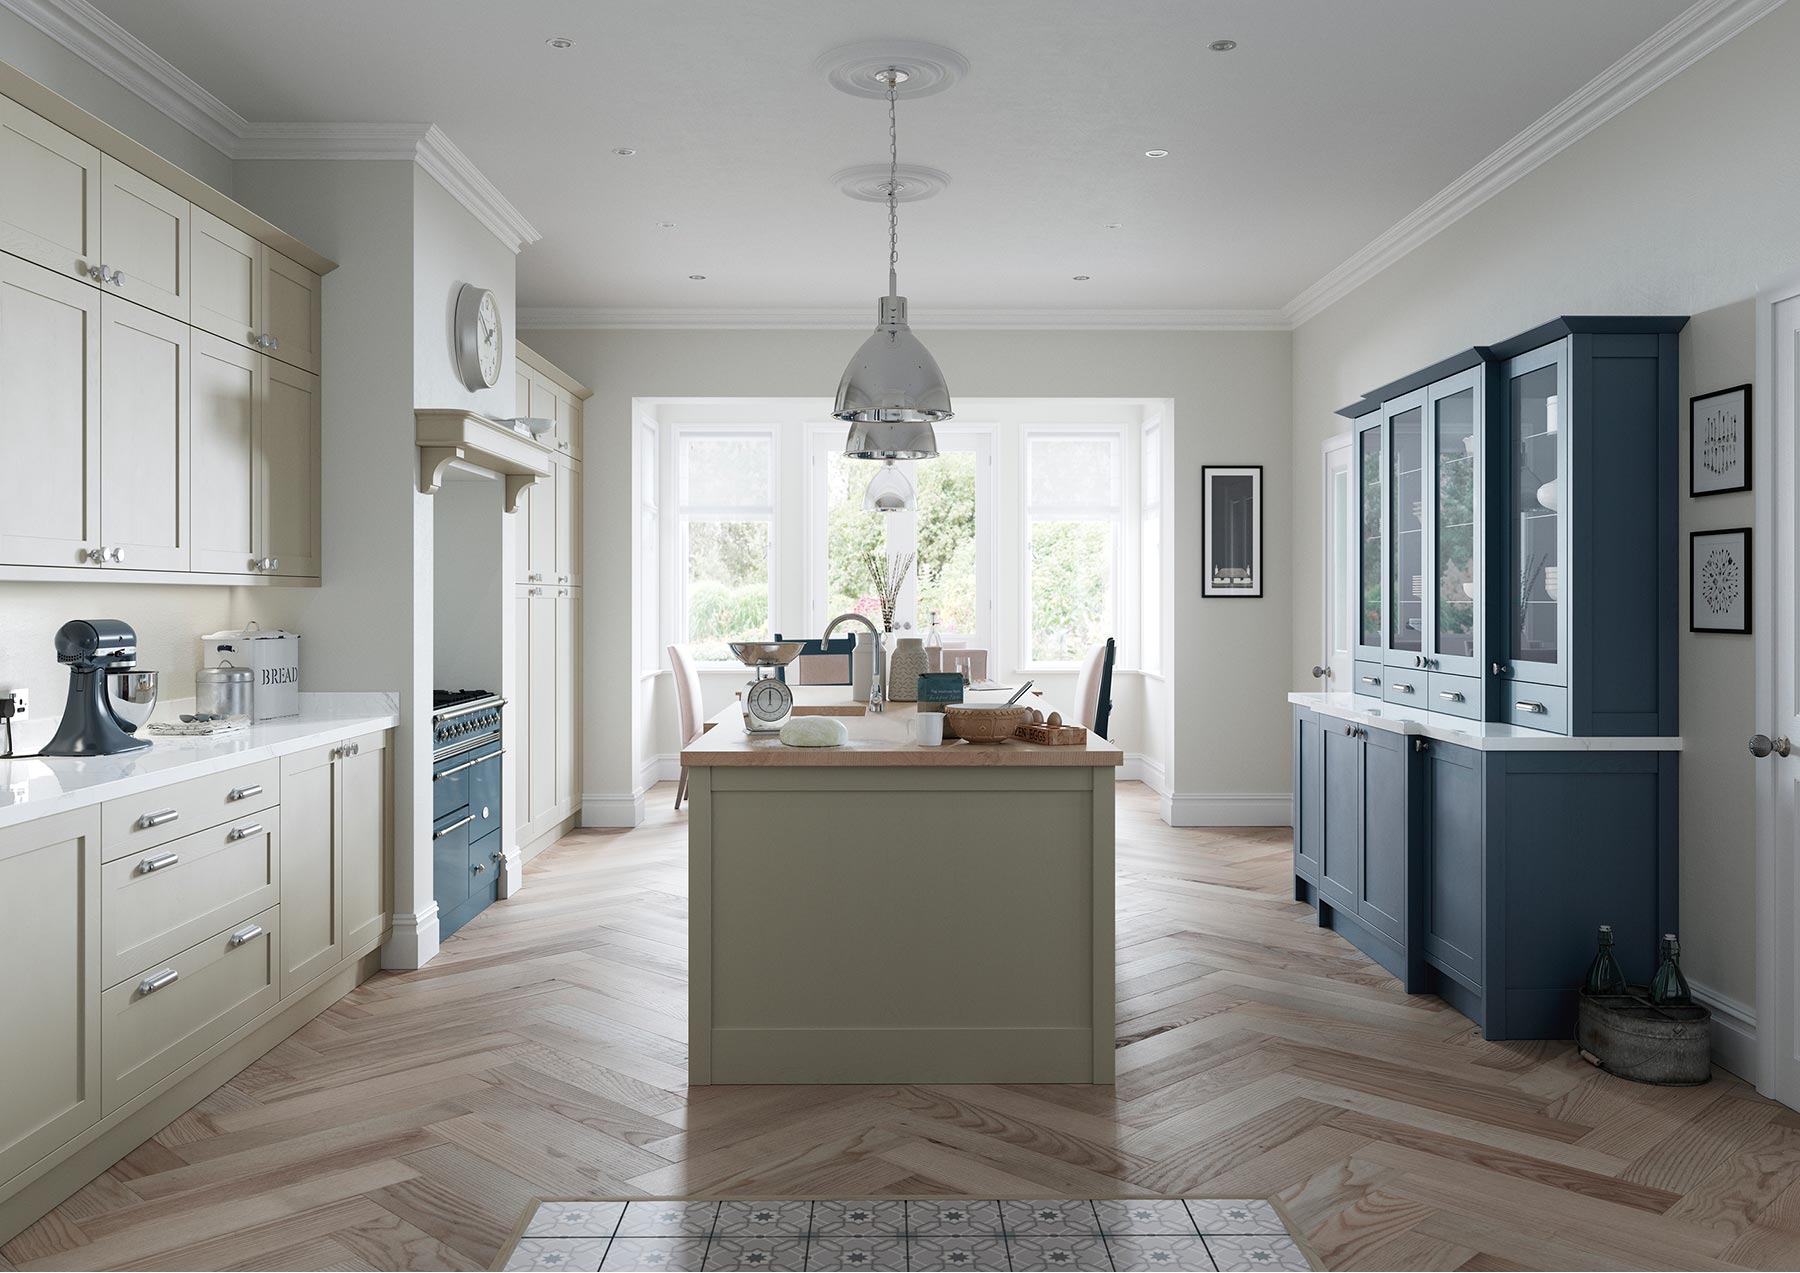 Skinny contemporary style shaker kitchen painted airforce blue and stone main